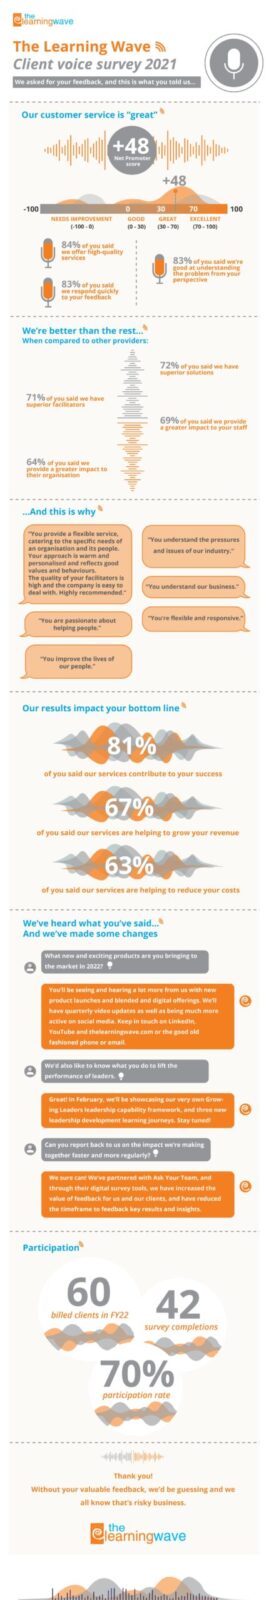 The Learning Wave Client Voice Survey Results 2022